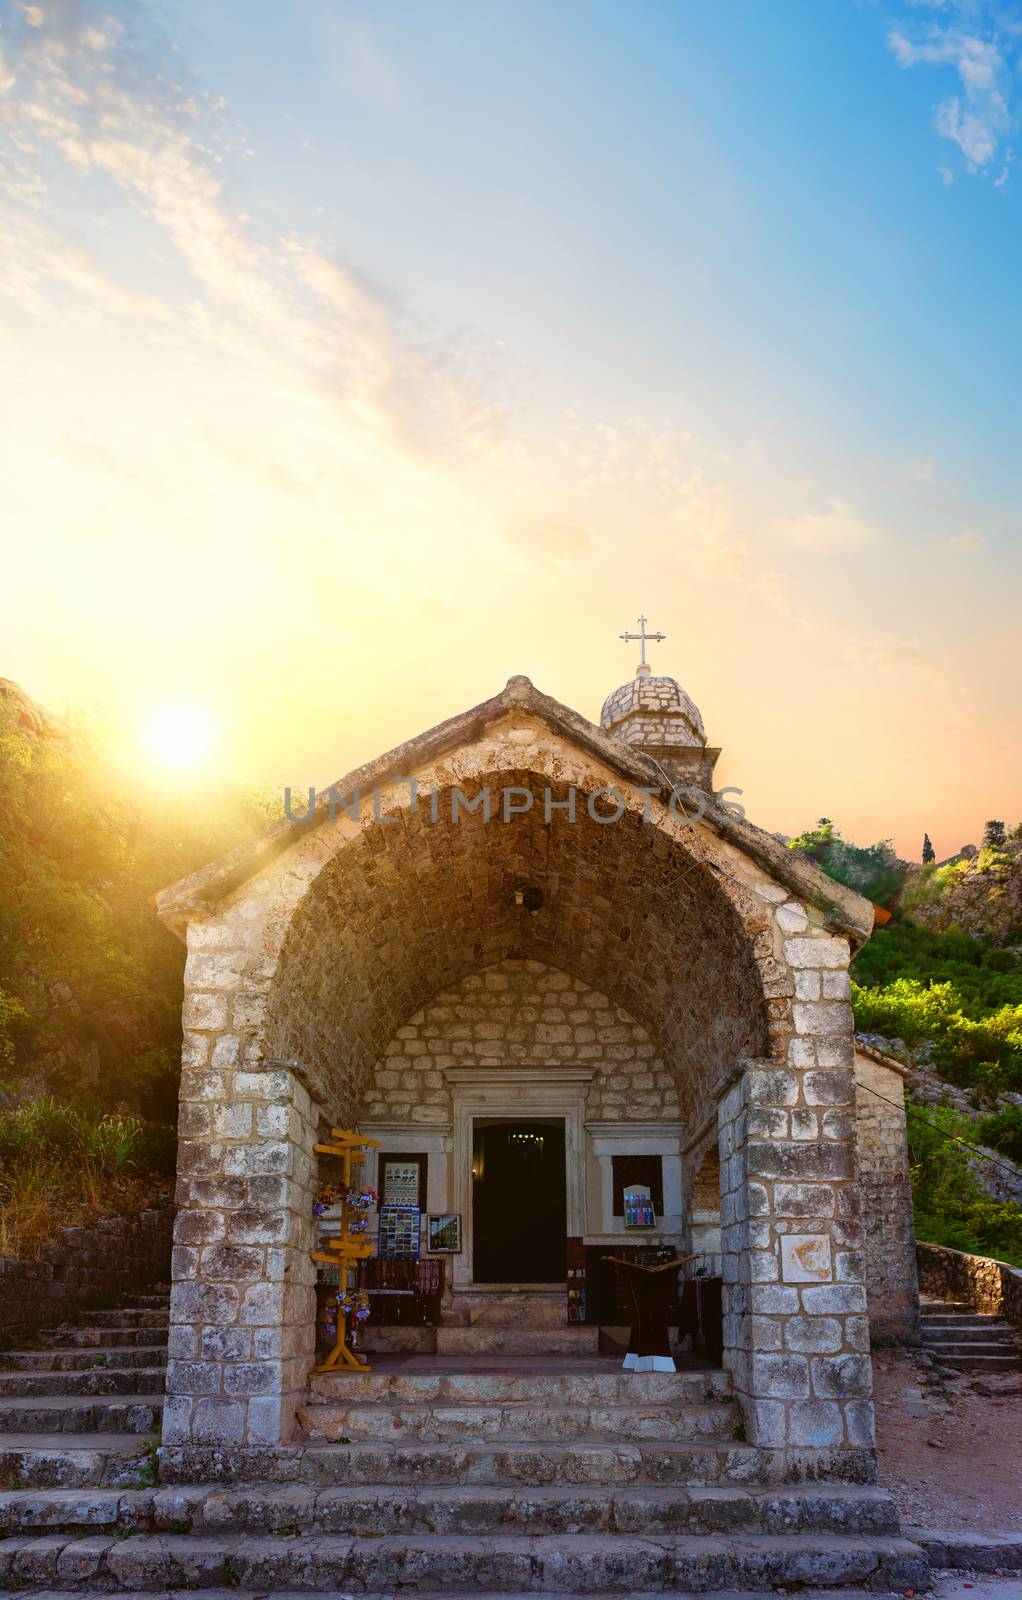 Medieval catholic church of Our Lady of Health in Kotor, Montenegro